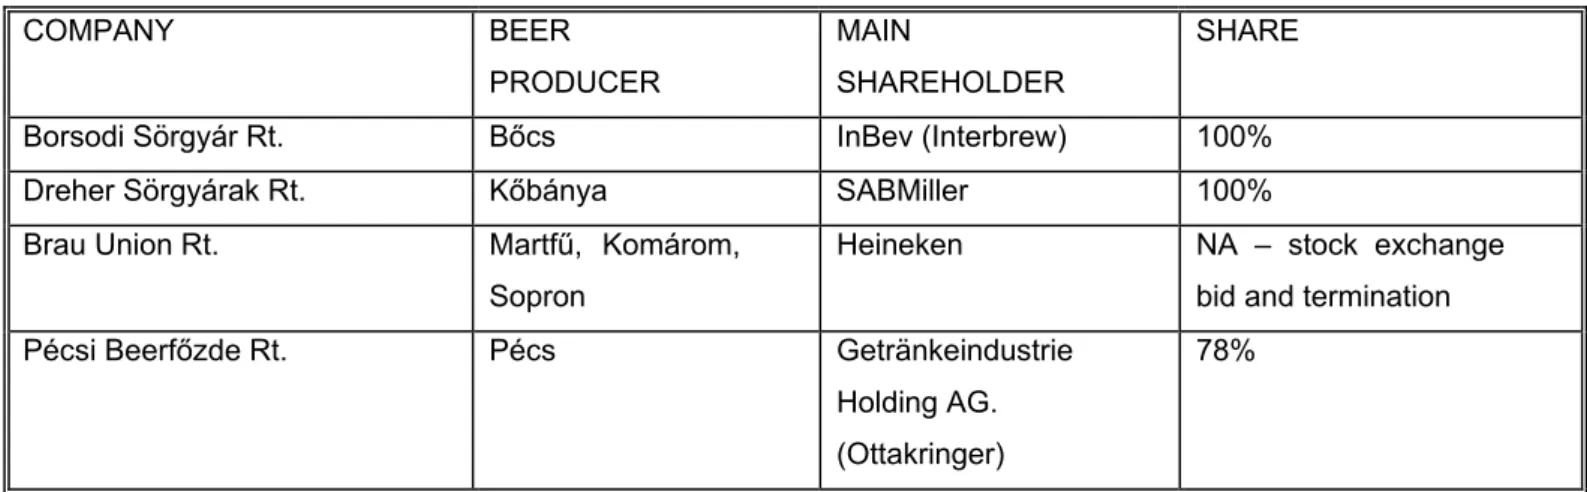 Table 13: Hungary’s leading beer producers and their ownership structure 